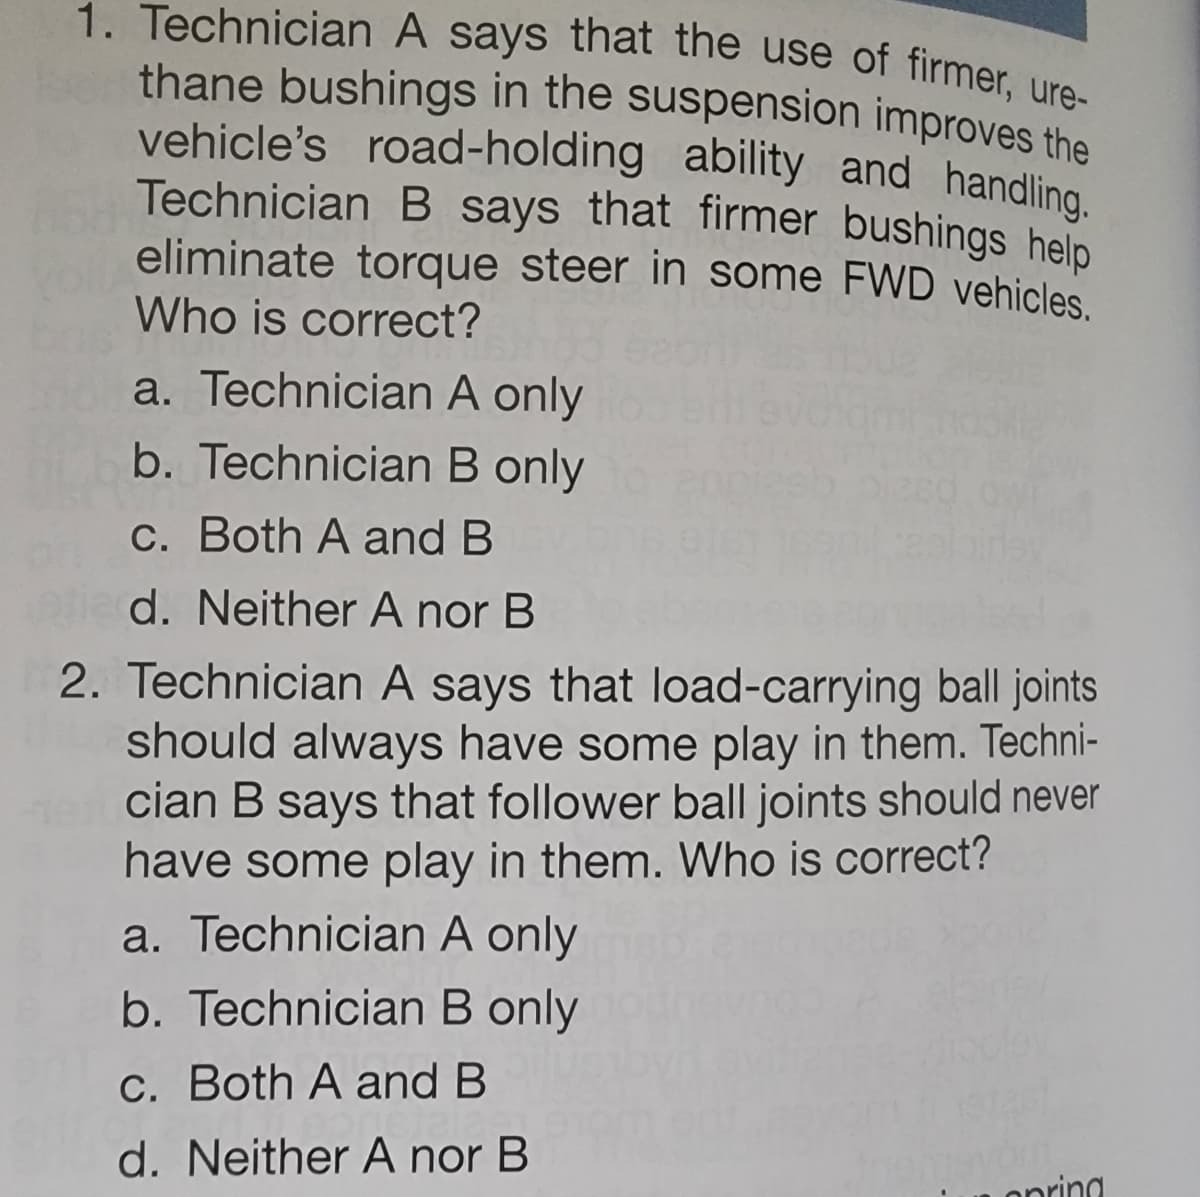 1. Technician A says that the use of firmer, ure-
thane bushings in the suspension improves the
vehicle's road-holding ability and handling.
Technician B says that firmer bushings help
eliminate torque steer in some FWD vehicles.
Who is correct?
a. Technician A only
b. Technician B only
c. Both A and B
d. Neither A nor B
2. Technician A says that load-carrying ball joints
should always have some play in them. Techni-
cian B says that follower ball joints should never
have some play in them. Who is correct?
a. Technician A only
b. Technician B only
c. Both A and B
d. Neither A nor B
opring